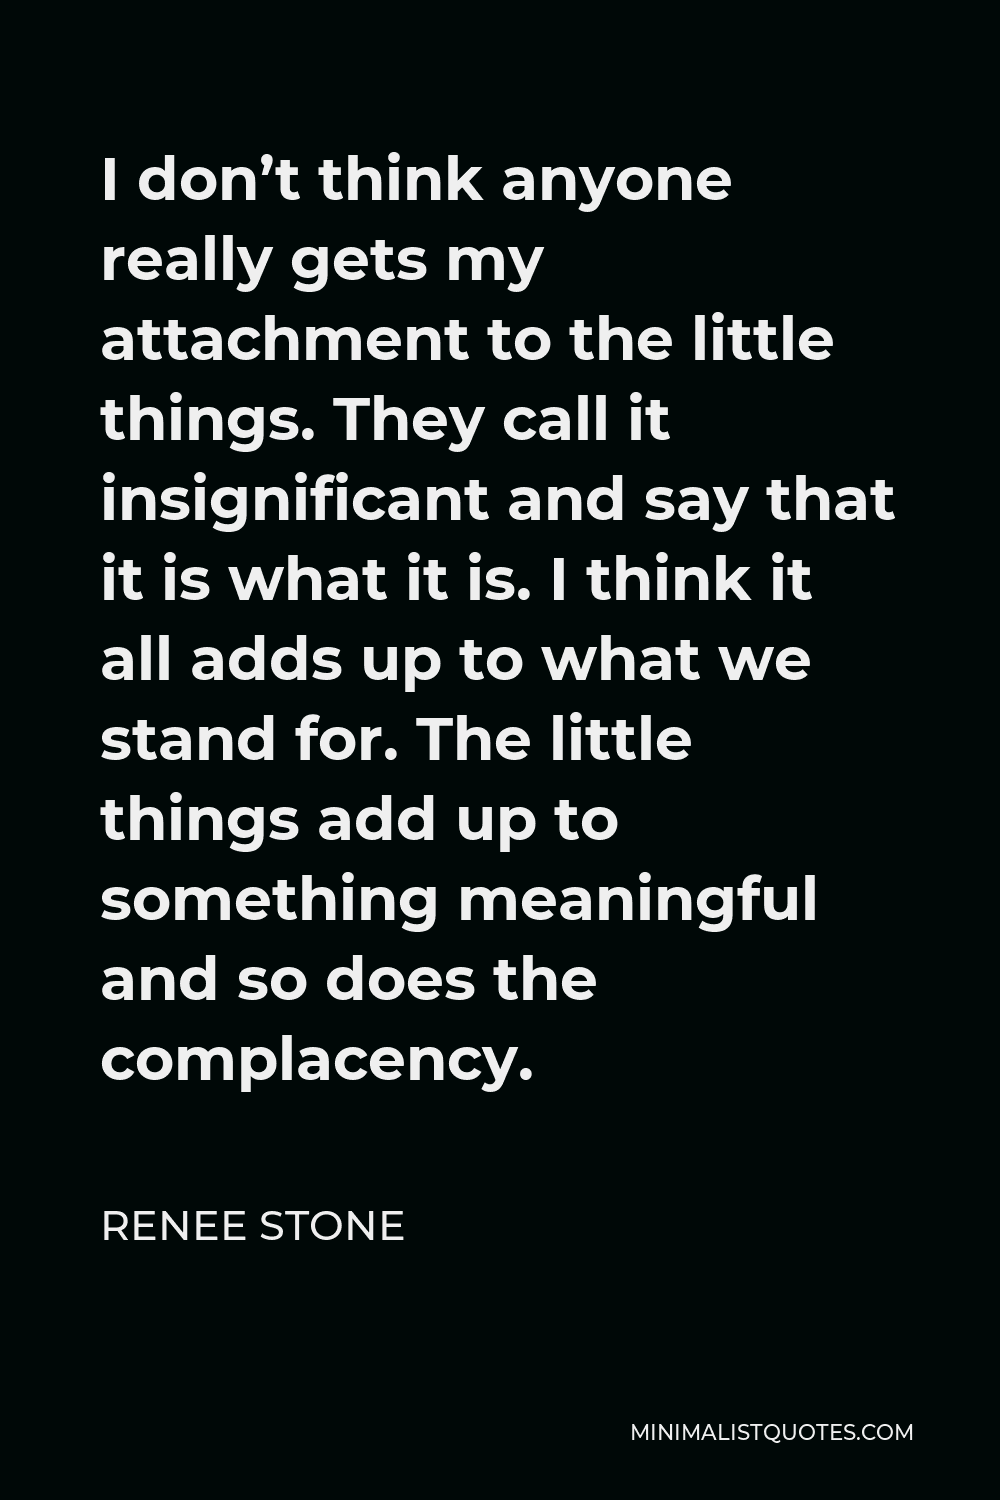 Renee Stone Quote - I don’t think anyone really gets my attachment to the little things. They call it insignificant and say that it is what it is. I think it all adds up to what we stand for. The little things add up to something meaningful and so does the complacency.